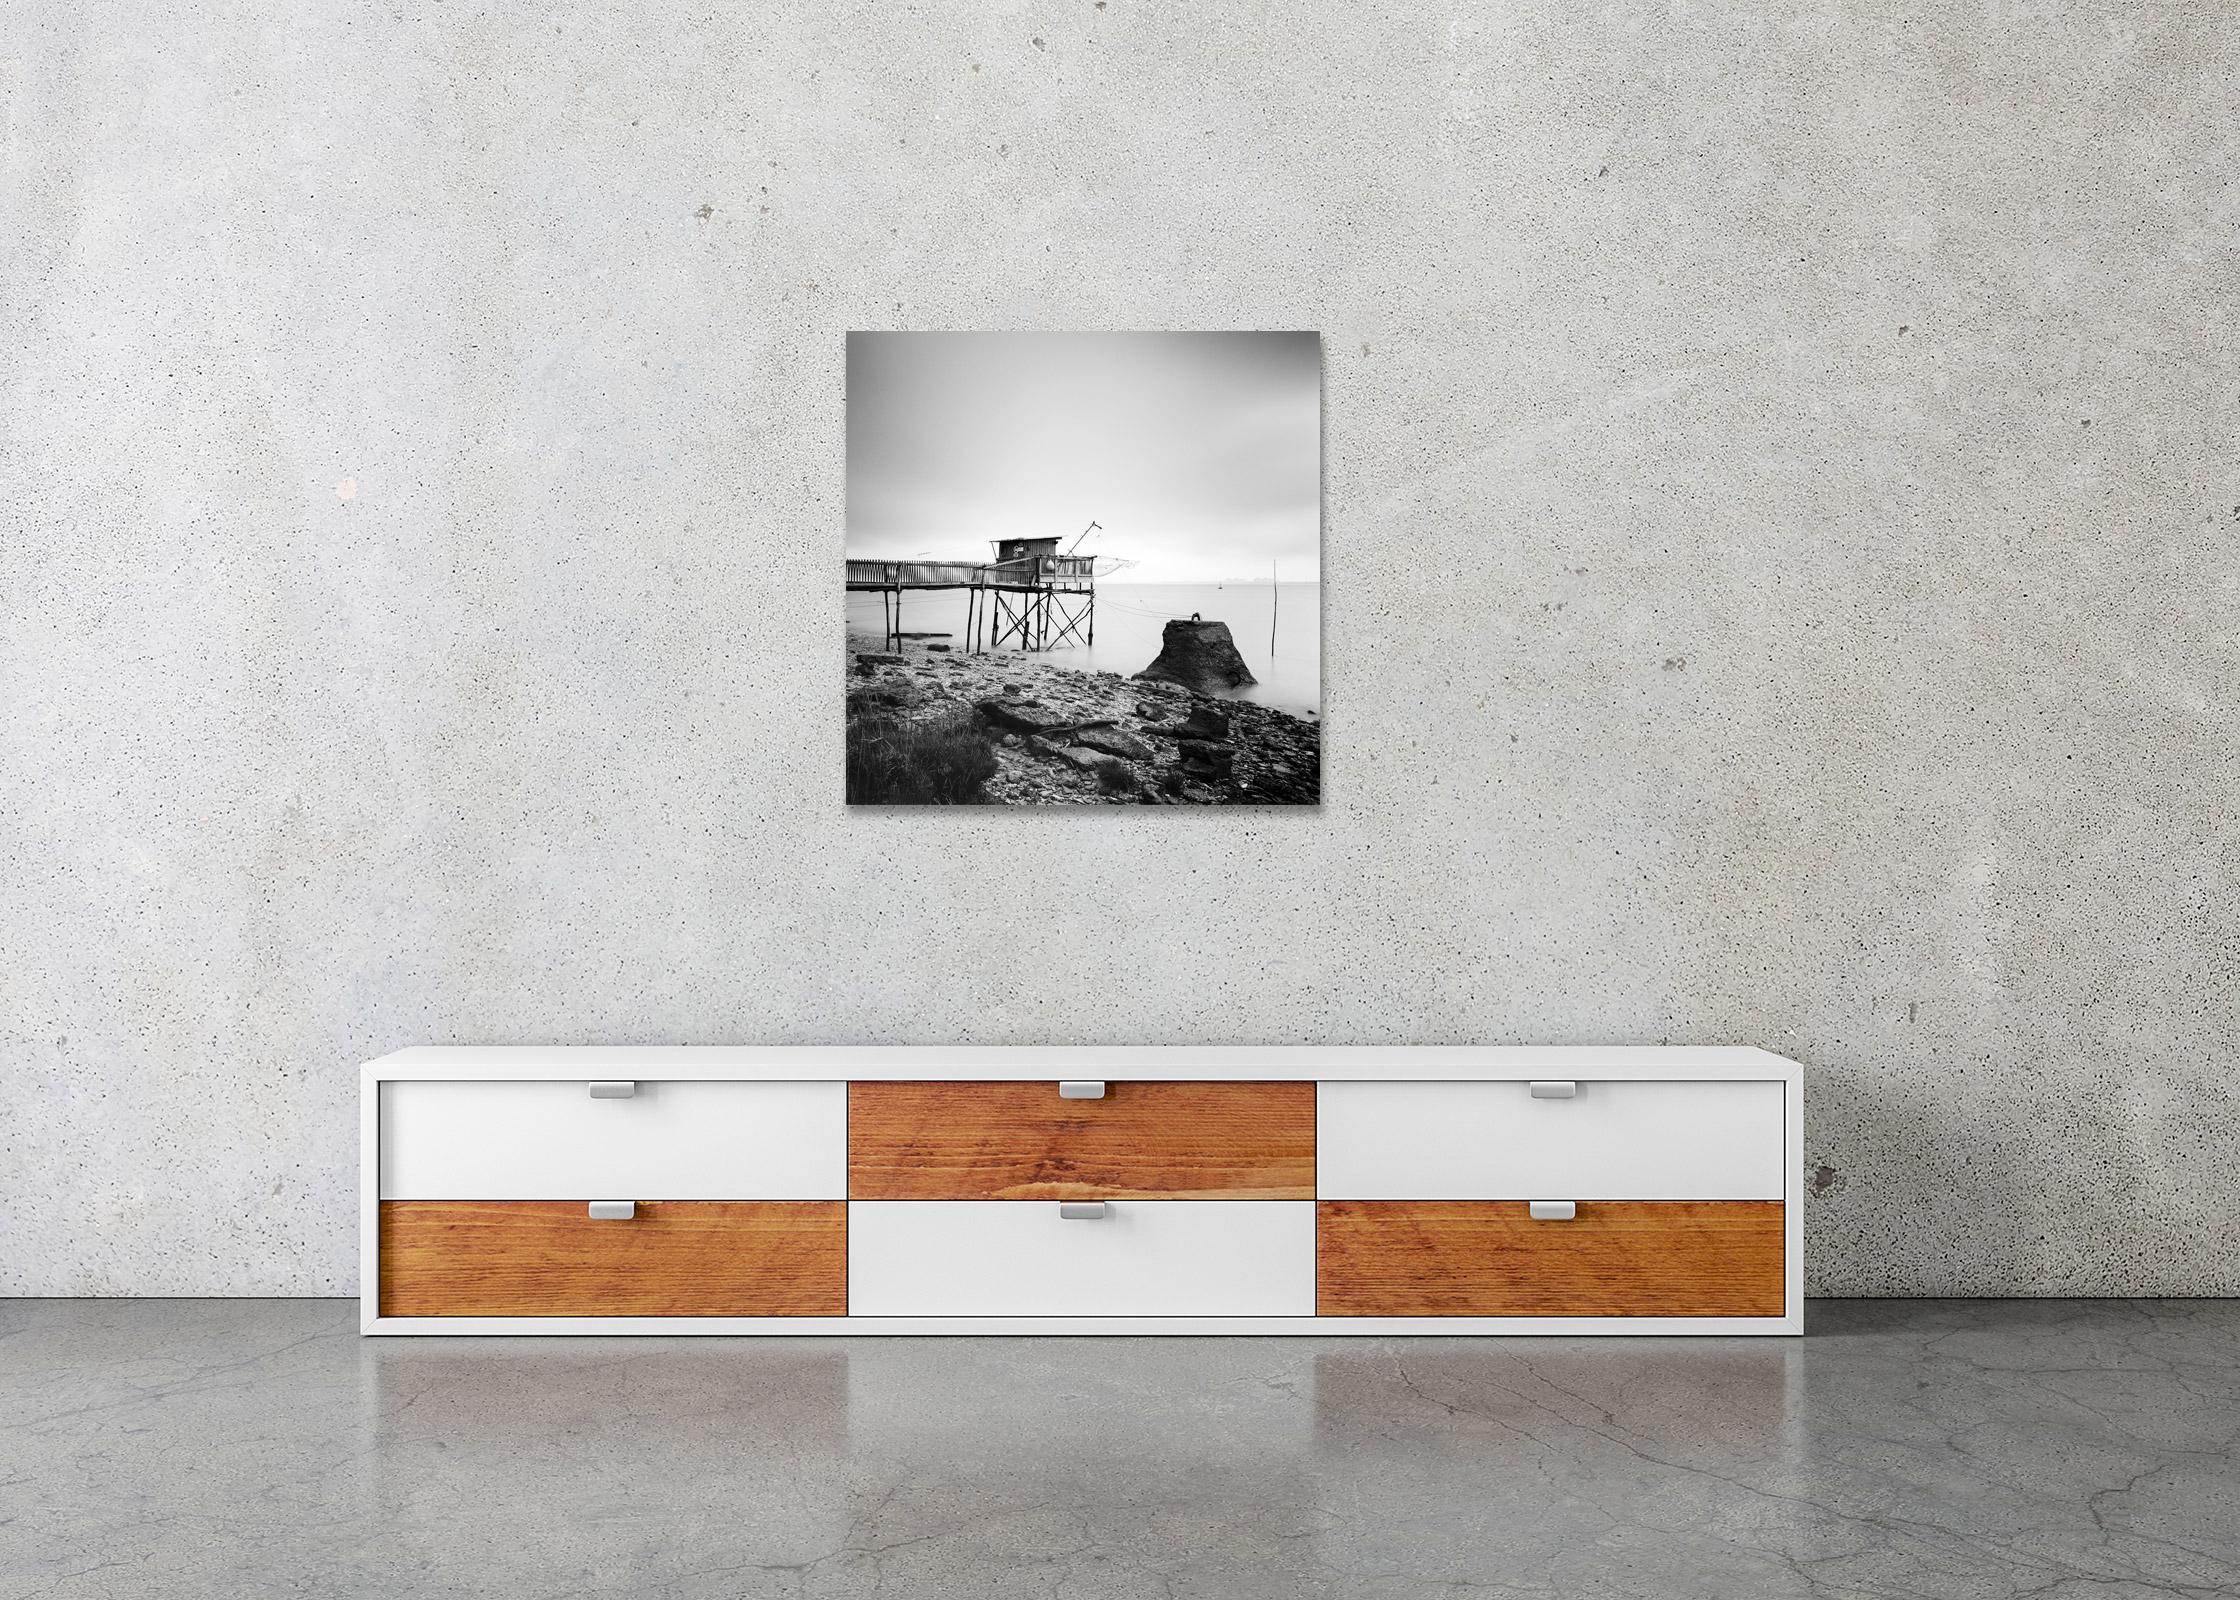 Black and white fine art long exposure waterscape - landscape photography. Archival pigment ink print as part of a limited edition of 9. All Gerald Berghammer prints are made to order in limited editions on Hahnemuehle Photo Rag Baryta. Each print